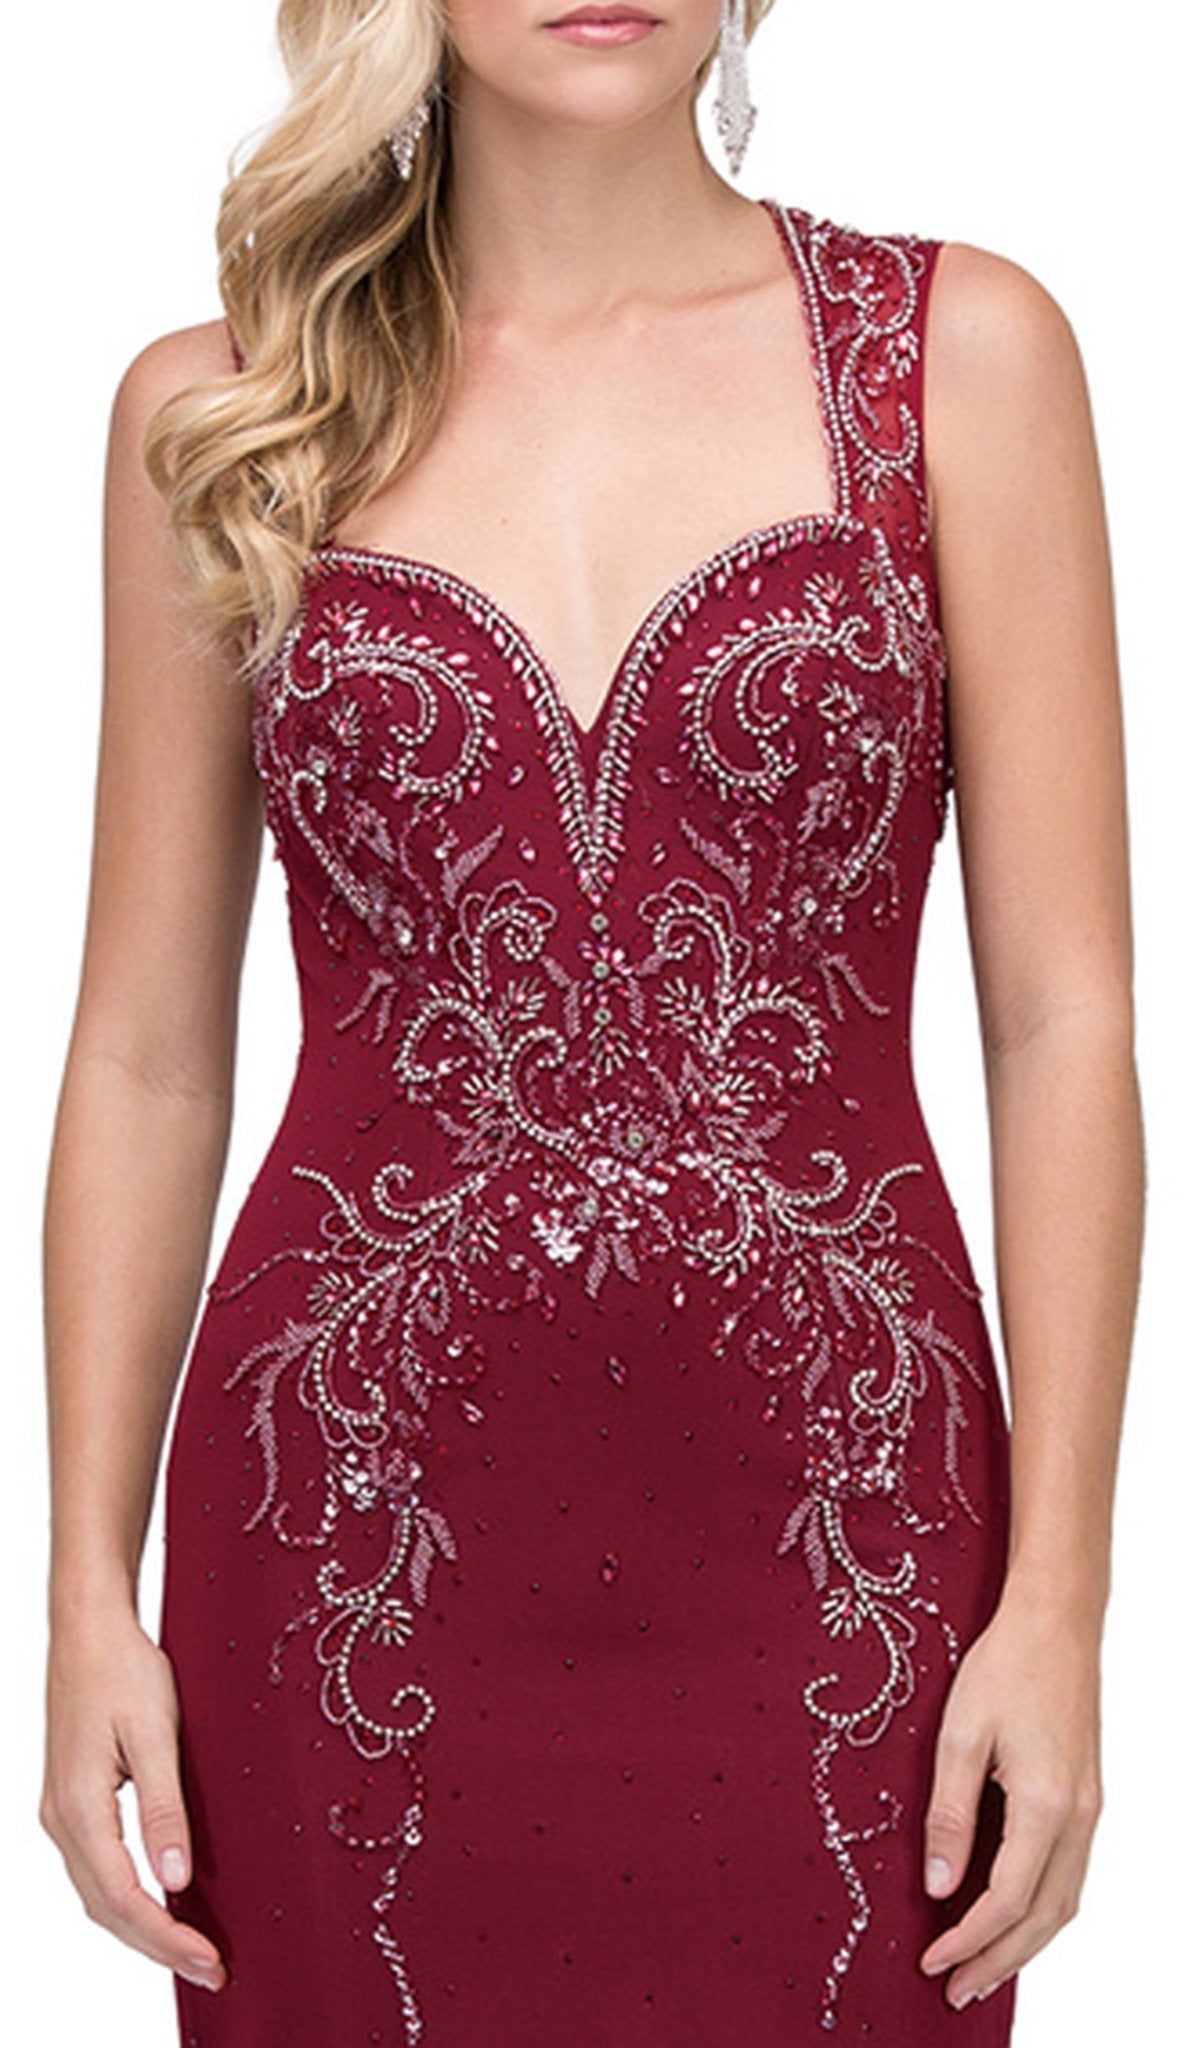 Dancing Queen - 2430 Sleeveless Embellished Sweetheart Sheath Prom Dress Special Occasion Dress M / Burgundy